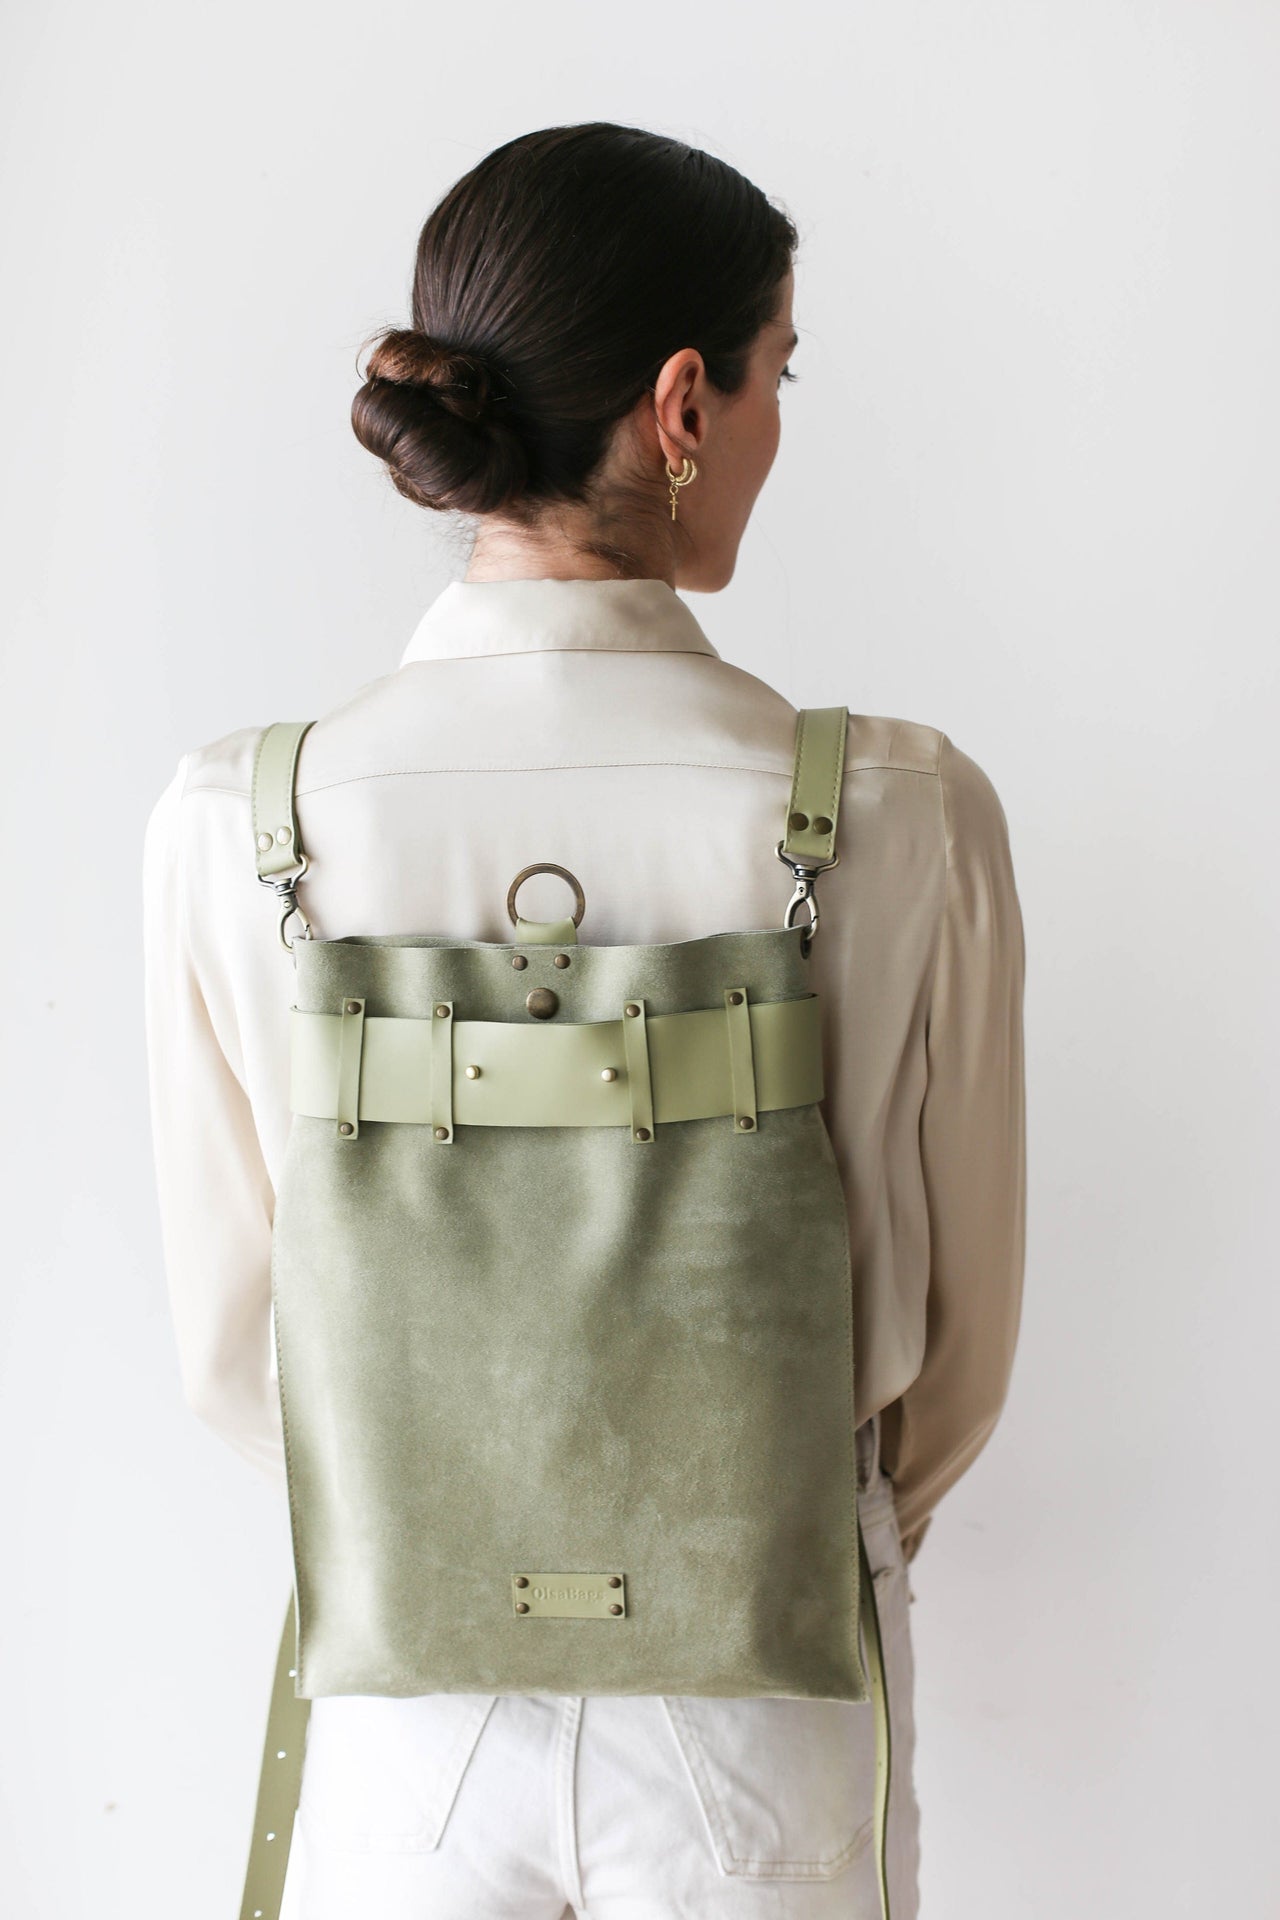 Suede Backpack, Durable, High-End Style